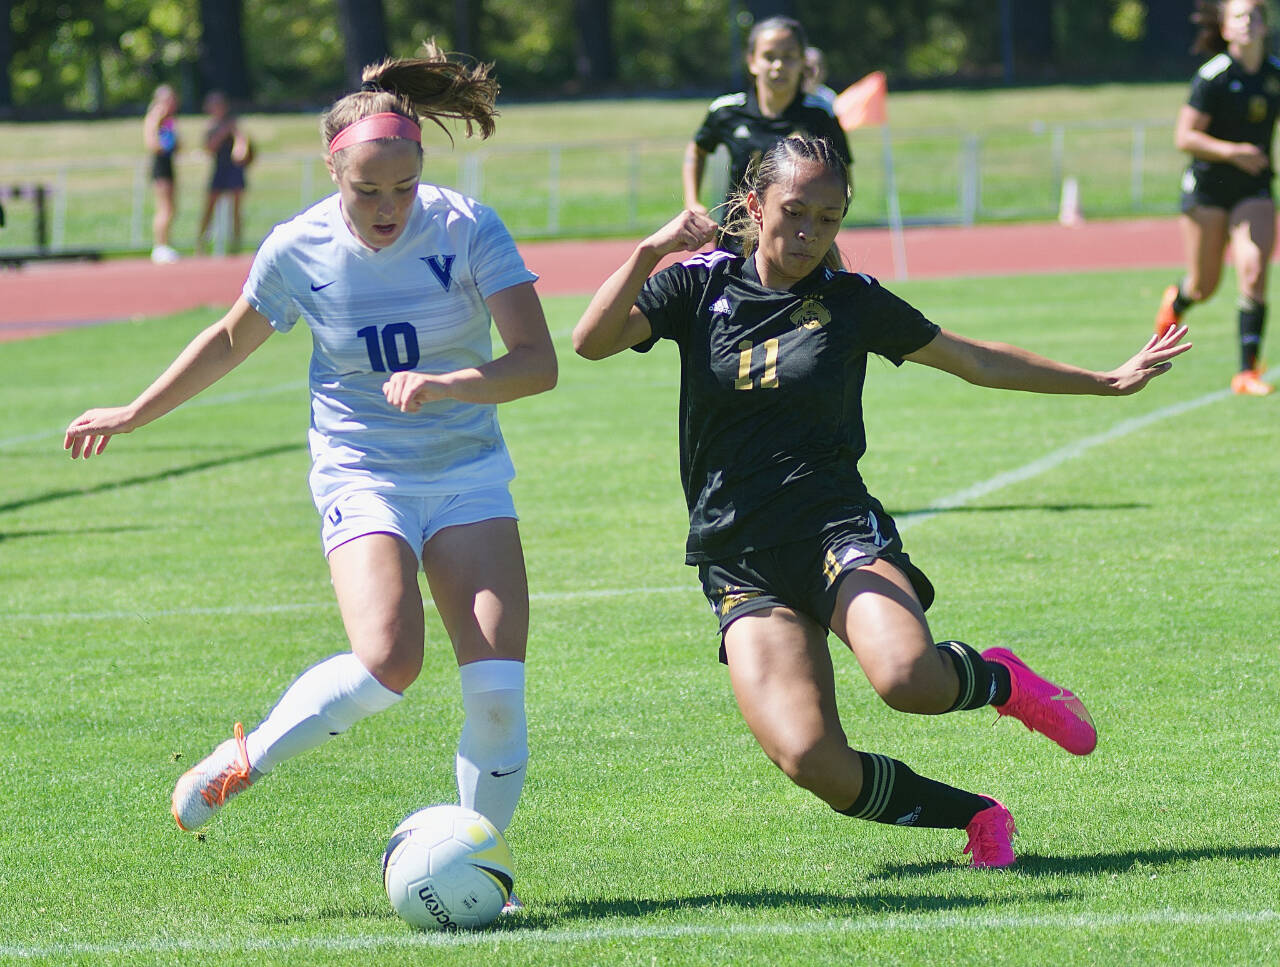 Photo by Rick Ross/Peninsula College / At right, Peninsula College’s Jaeda Mae Edayan, a freshman forward from Mililani, Hawaii, vies for possession with University of Victoria’s Sophie Murphy in an Aug. 13 scrimmage in Victoria, B.C.